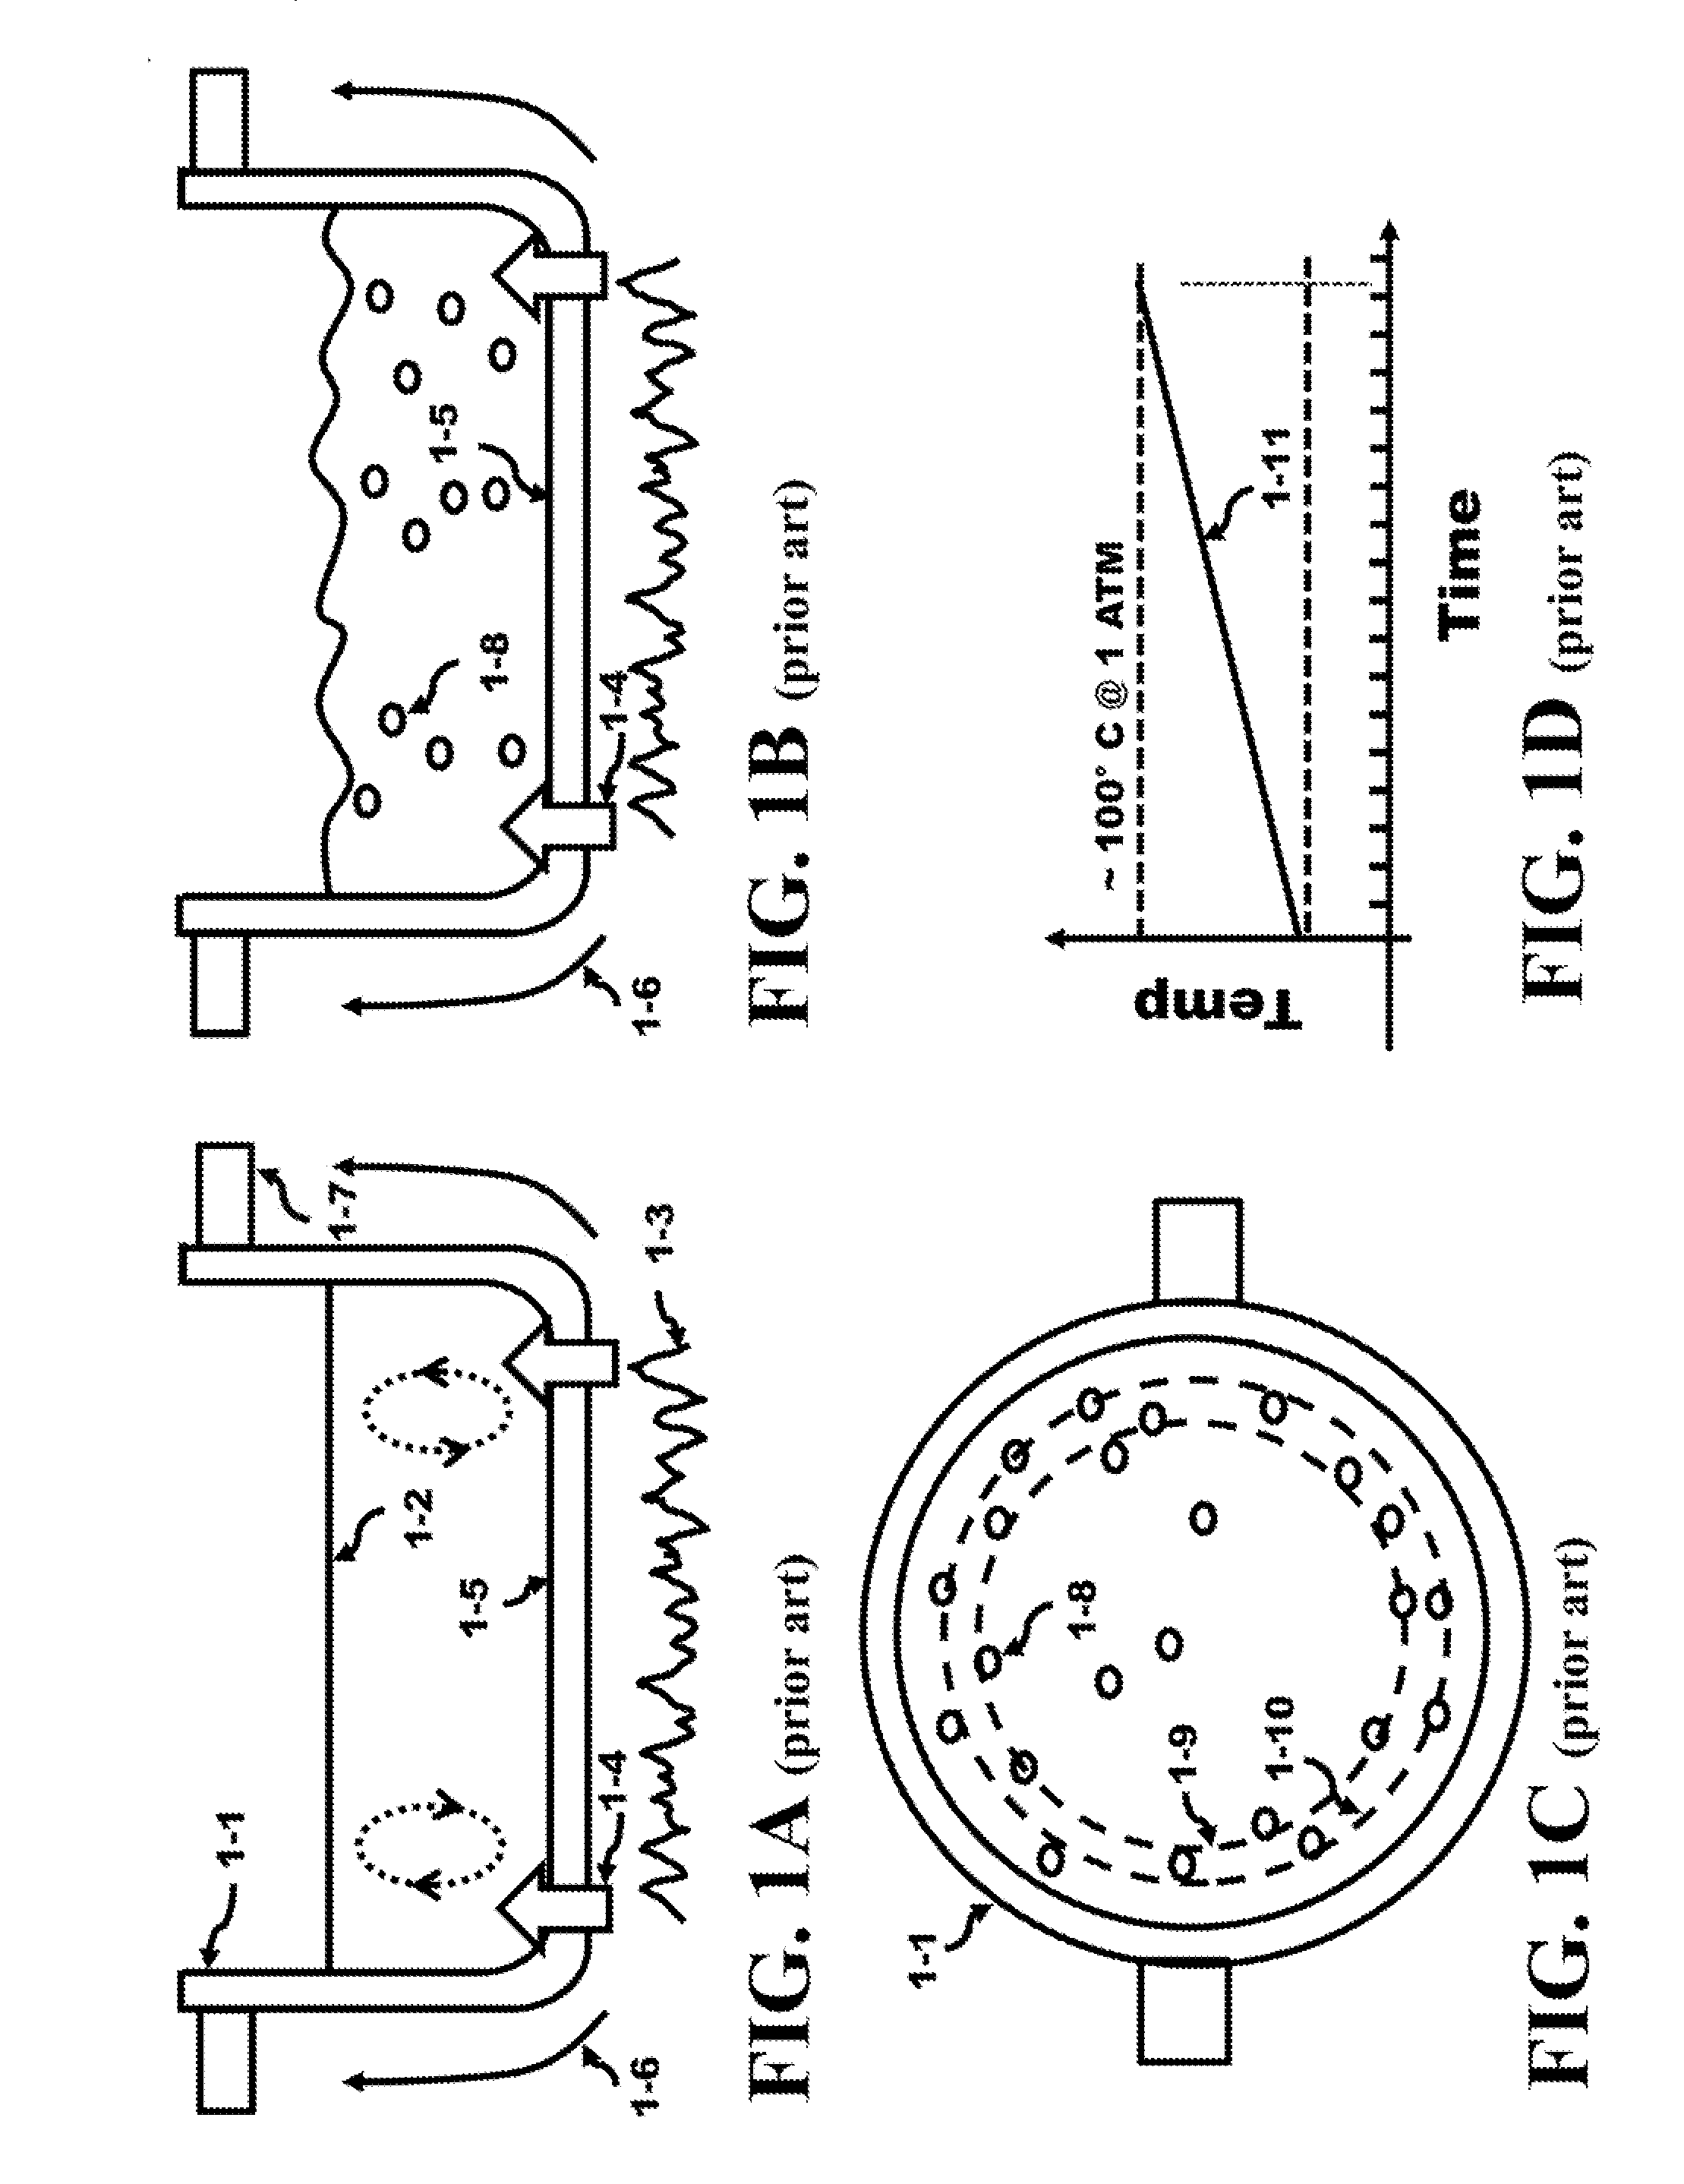 Method and Apparatus for Quickly Cooking Comestibles